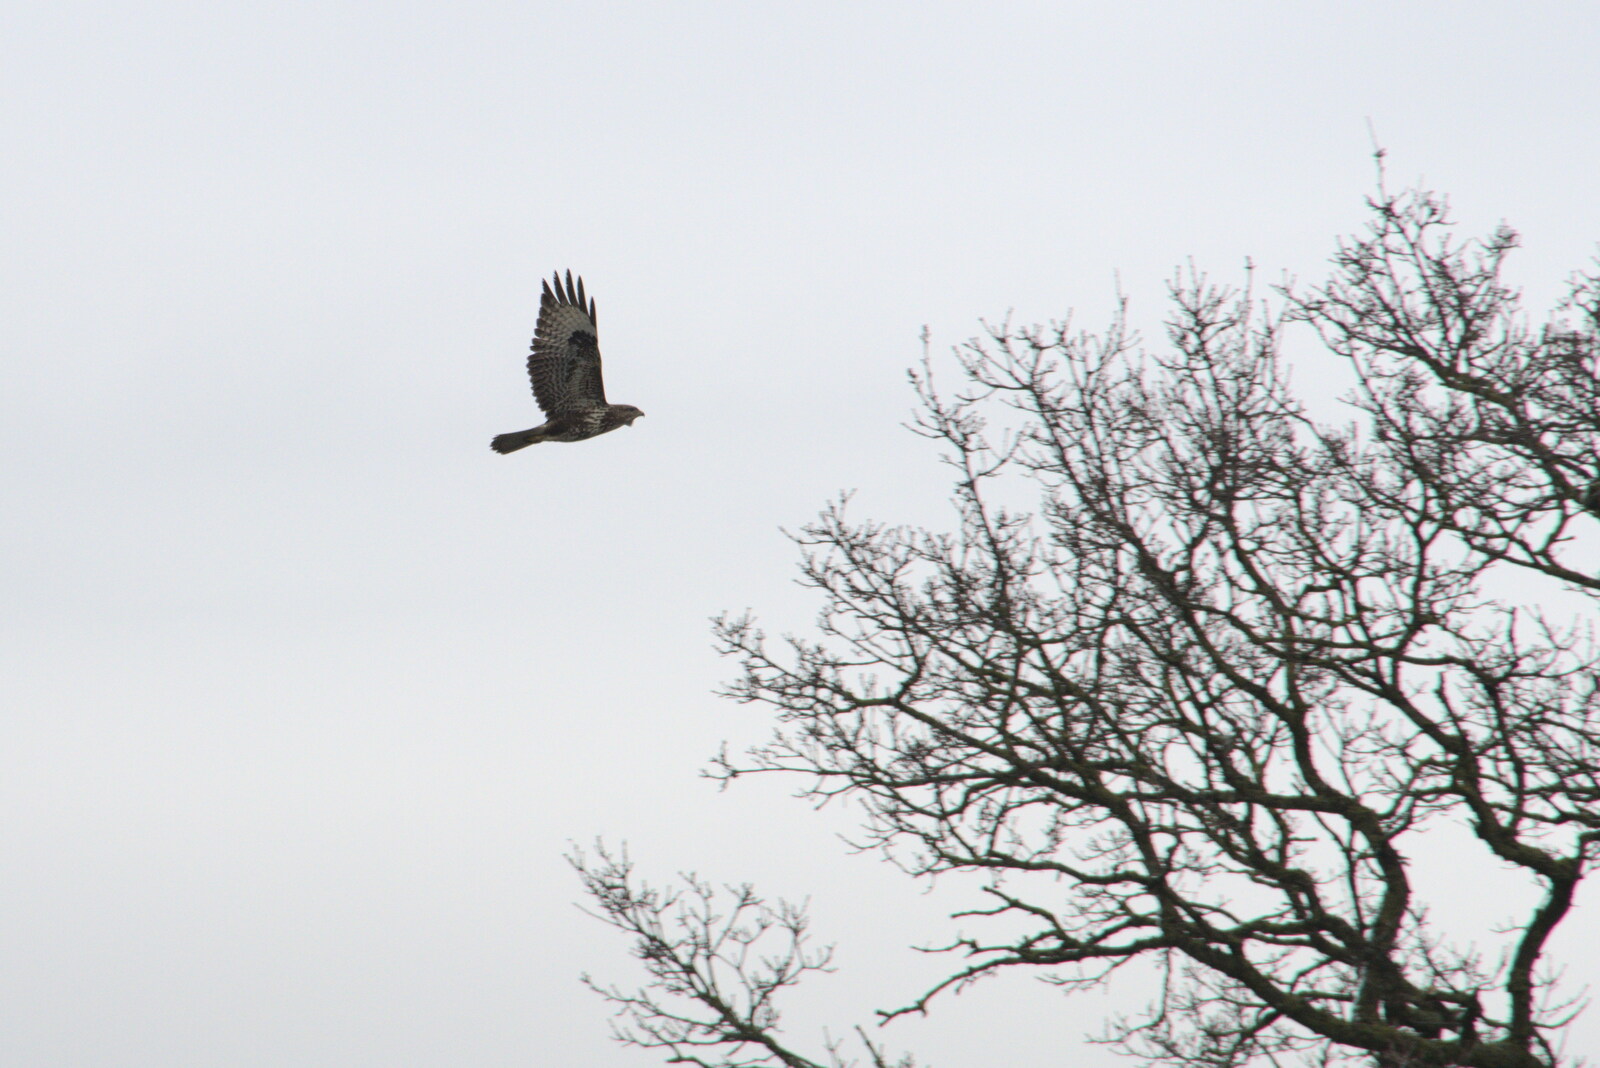 The resident buzzard flies around from Winter Lockdown Walks, Thrandeston and Brome, Suffolk - 24th January 2021